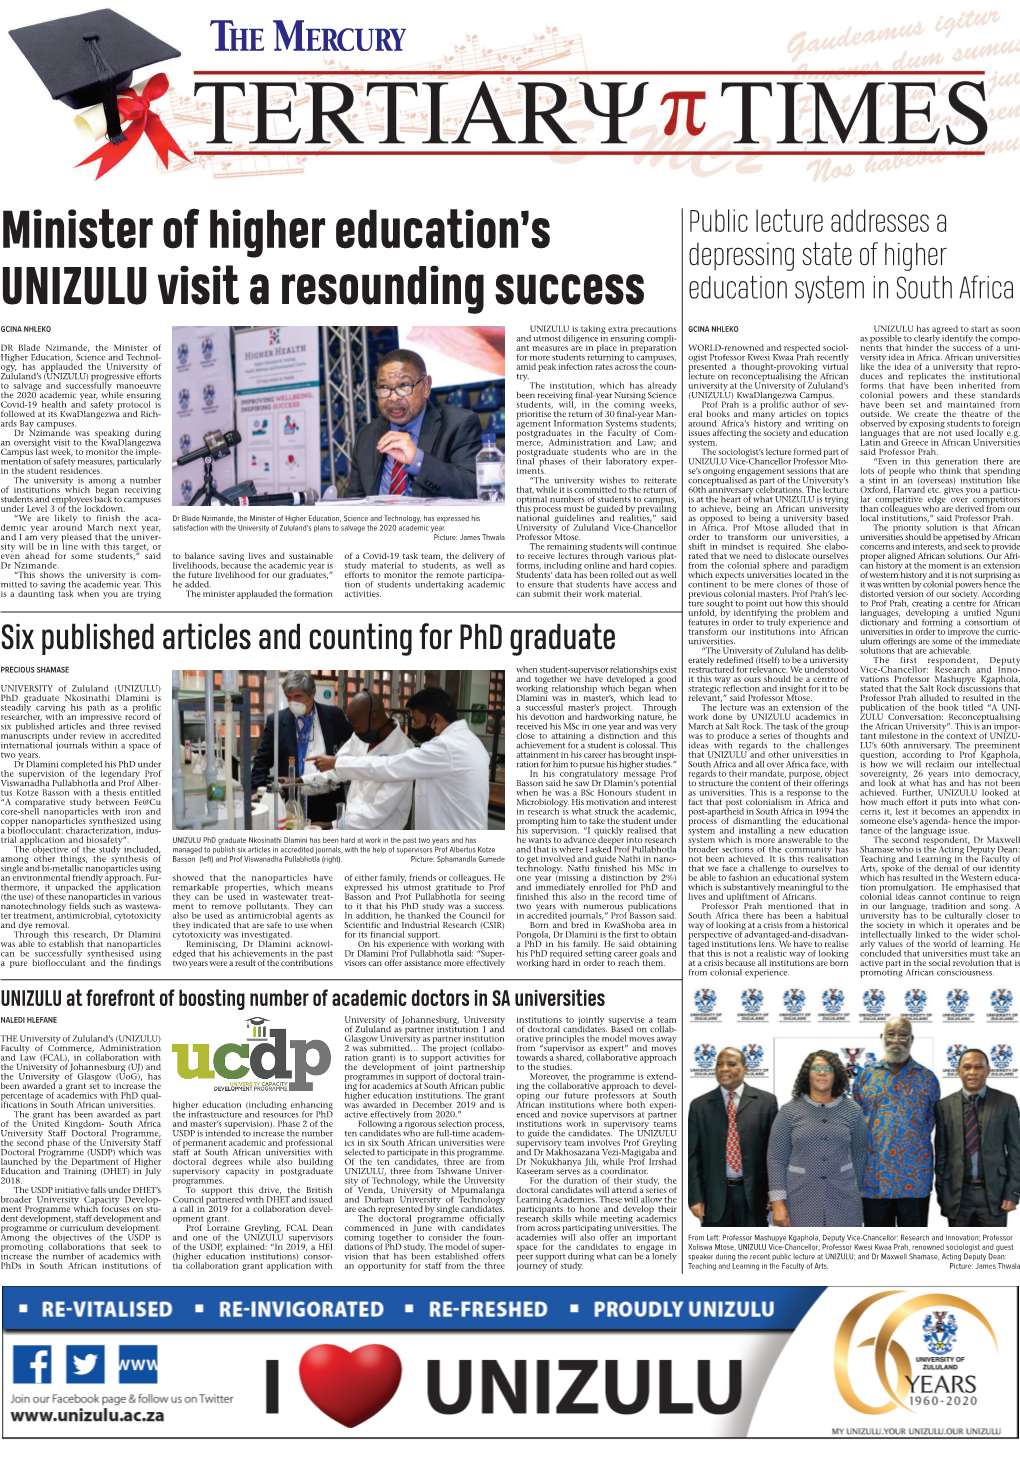 Minister of Higher Education's UNIZULU Visit a Resounding Success